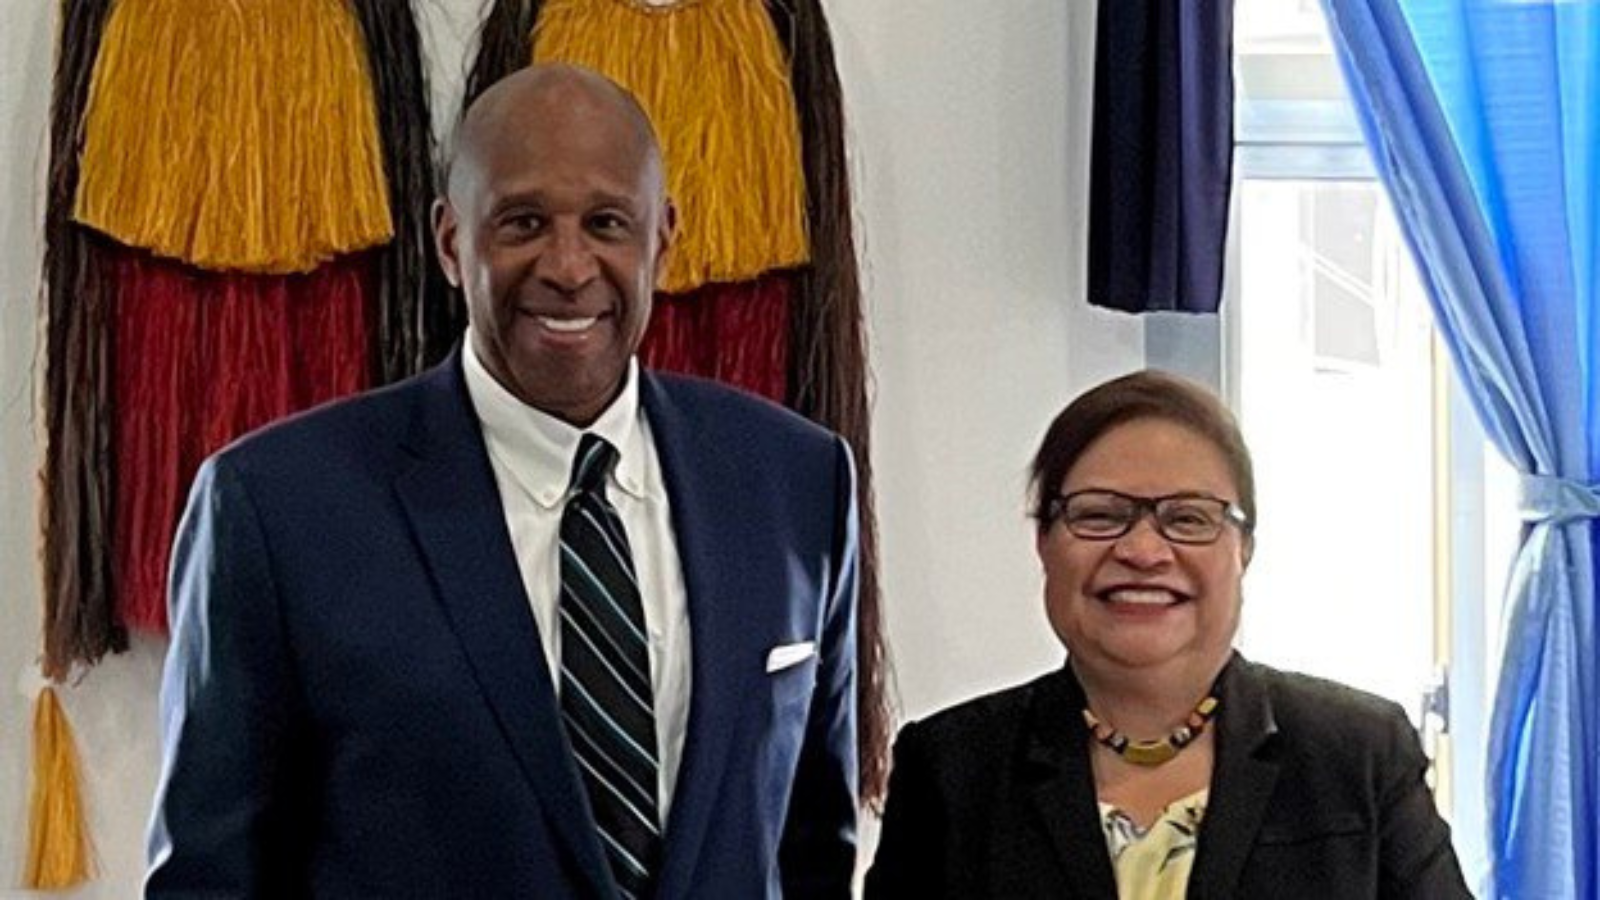 Bureau of Political-Military Affairs's Office of Global Programs and Initiatives’ Director, Mr. Michael Smith, and the Honorable J. Uduuch Sengebau Senior, Vice President and Minister of Justice, PW stand next to each other, smiling, in a bright room.